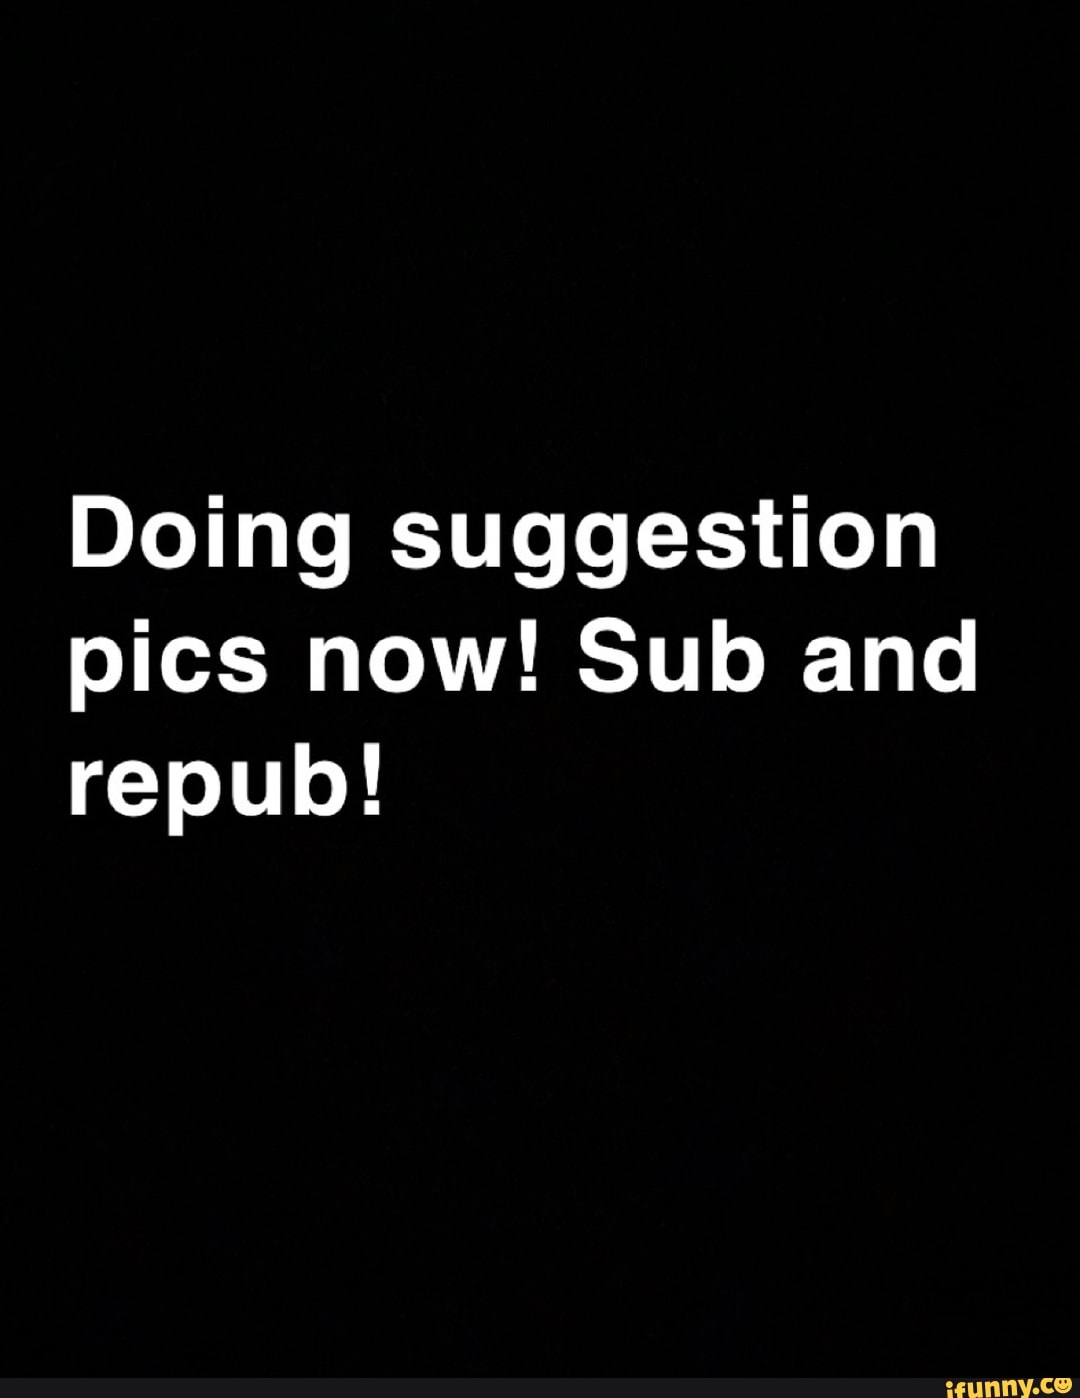 Doing suggestion pics now! Sub and repub! - iFunny